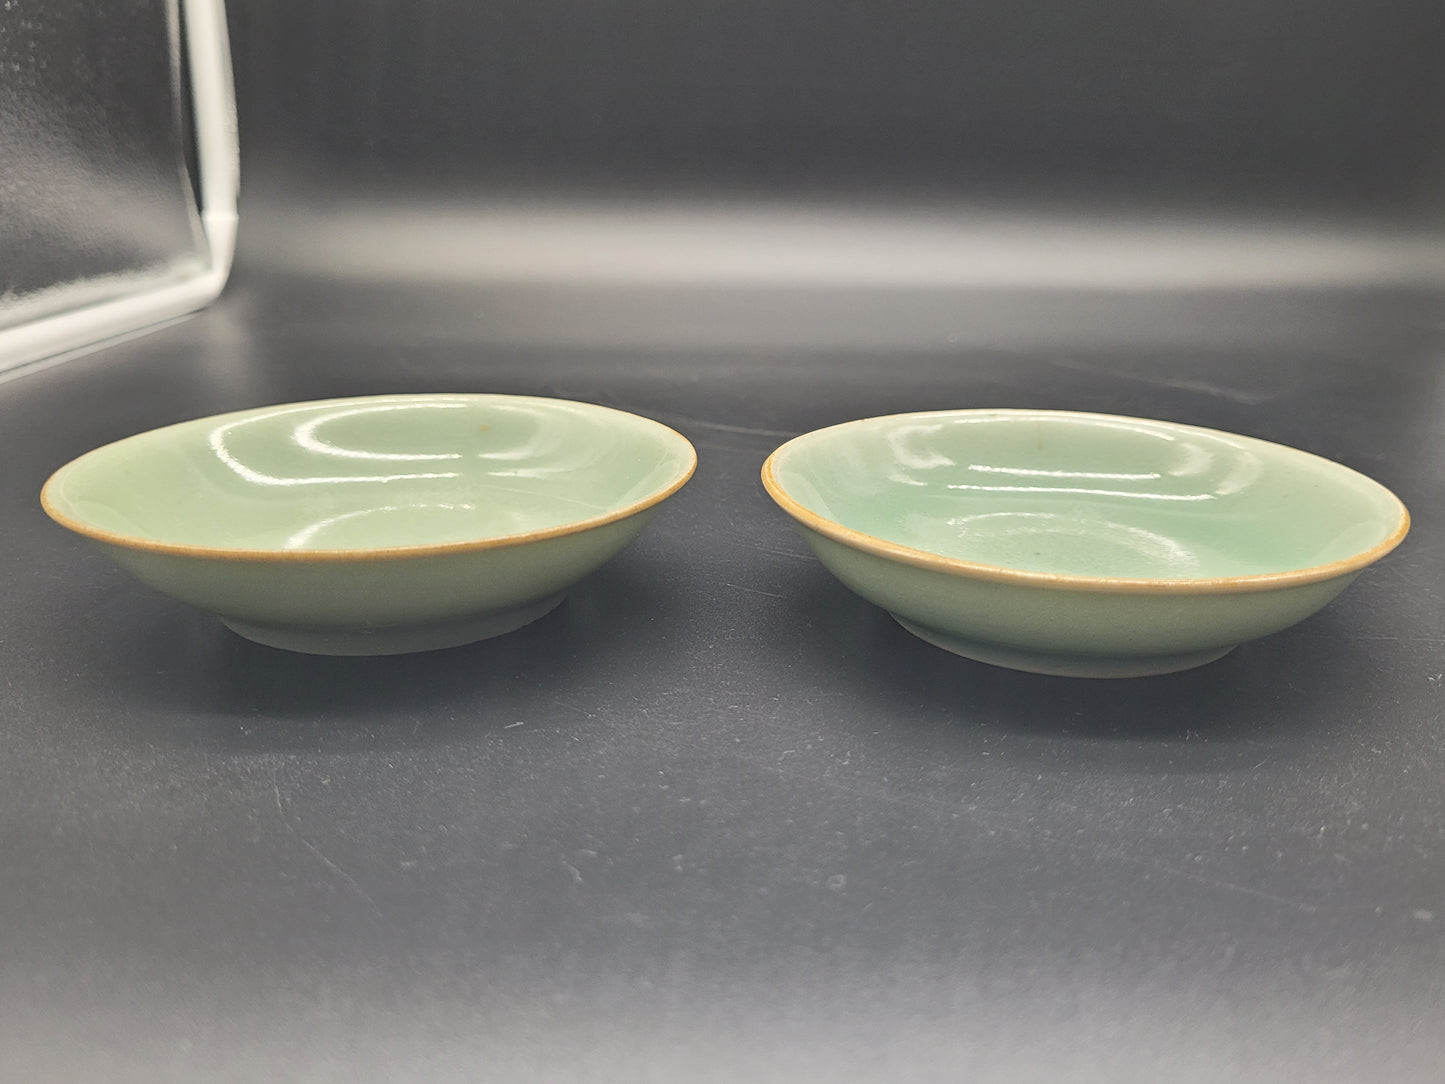 buy asian art online Antique Chinese Longquan Celadon Plates / Bowls Antiques & collectables USA